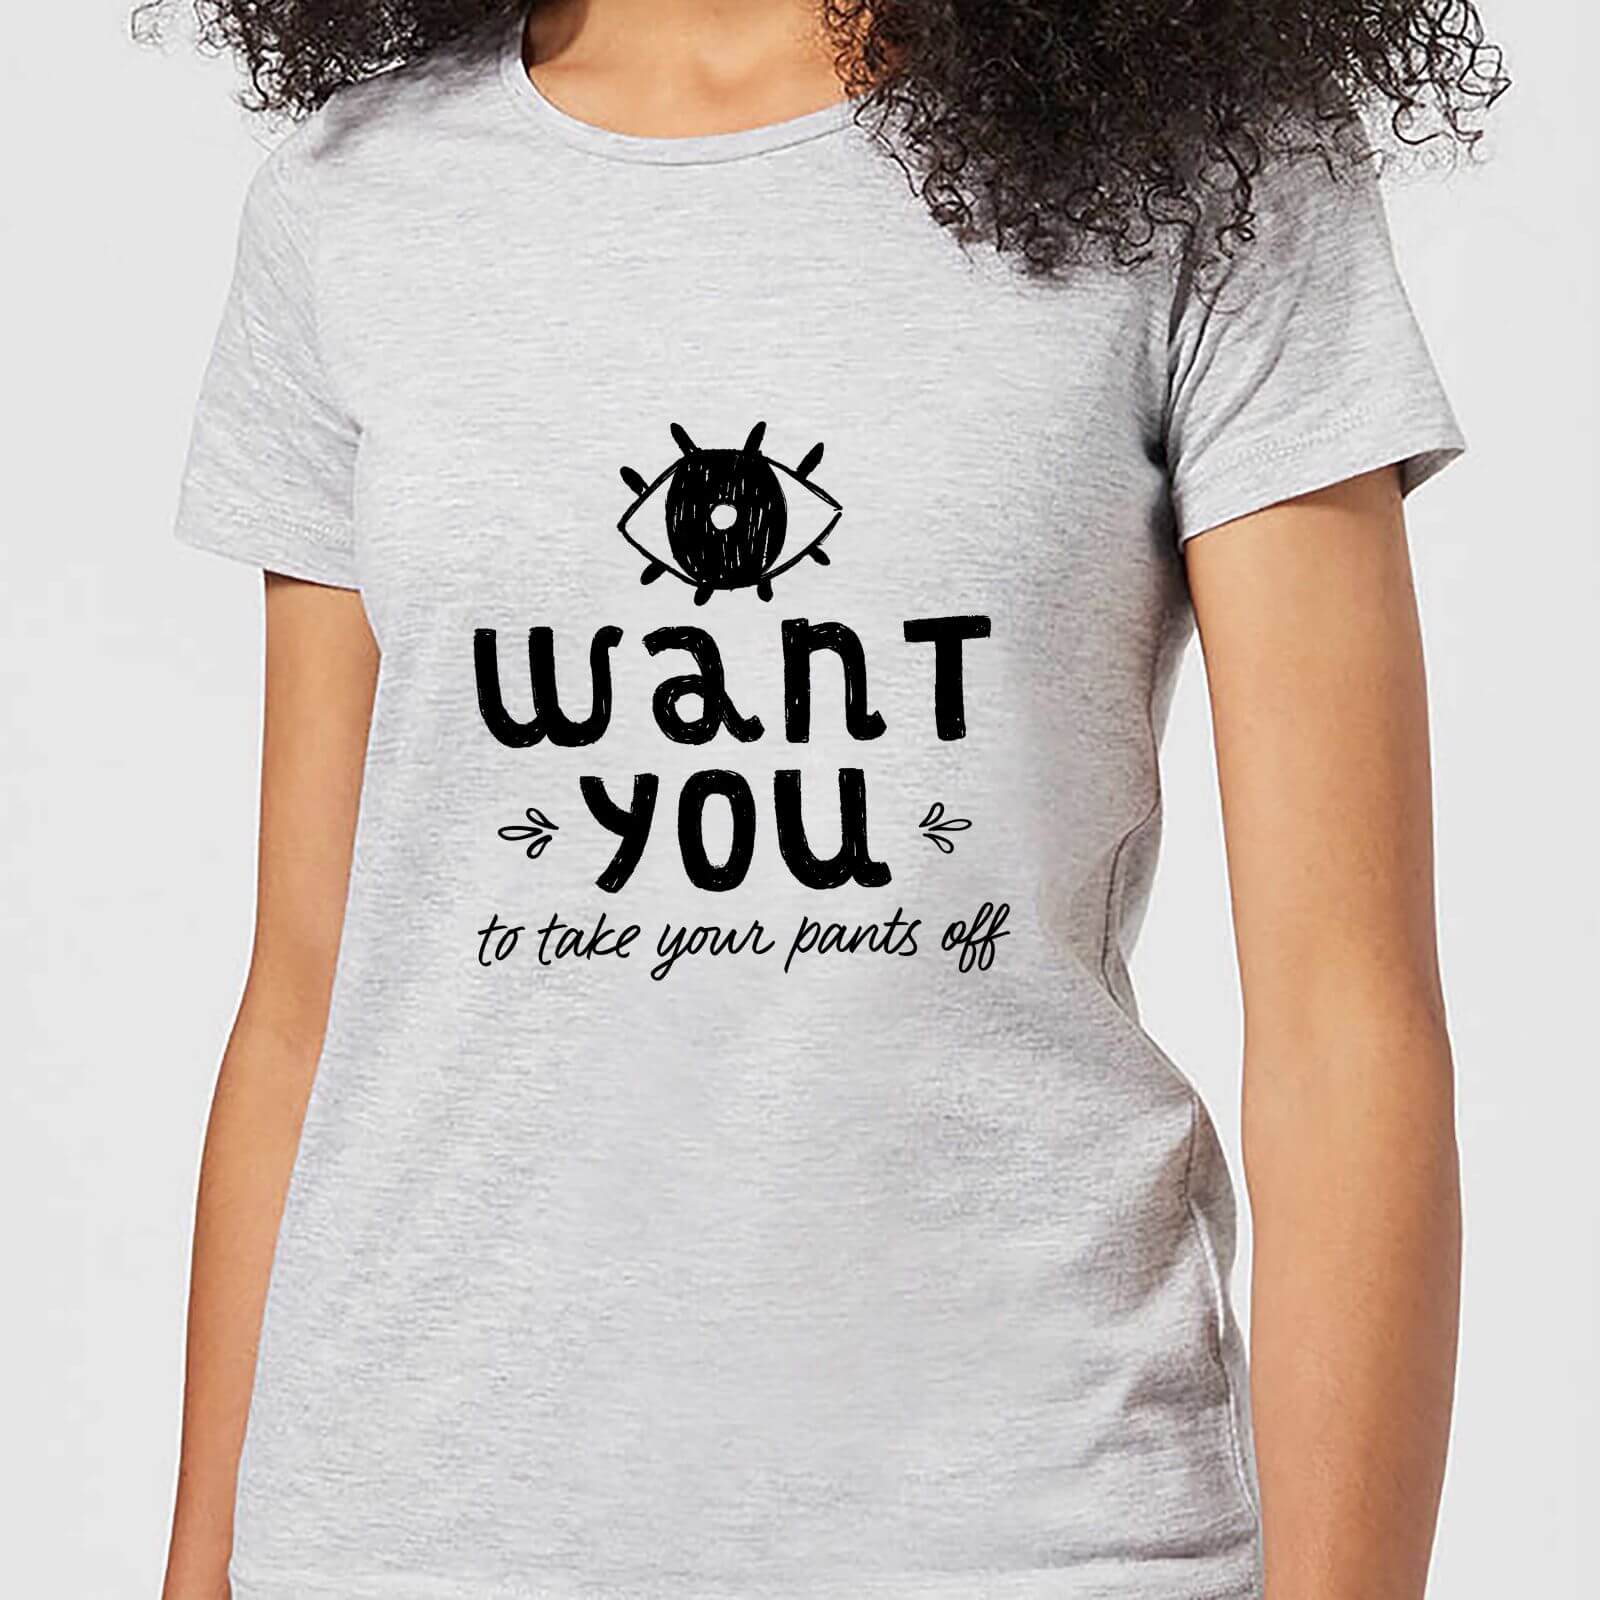 I Want You To Take Your Pants Off Women's T-Shirt - Grey - XXL - Grey